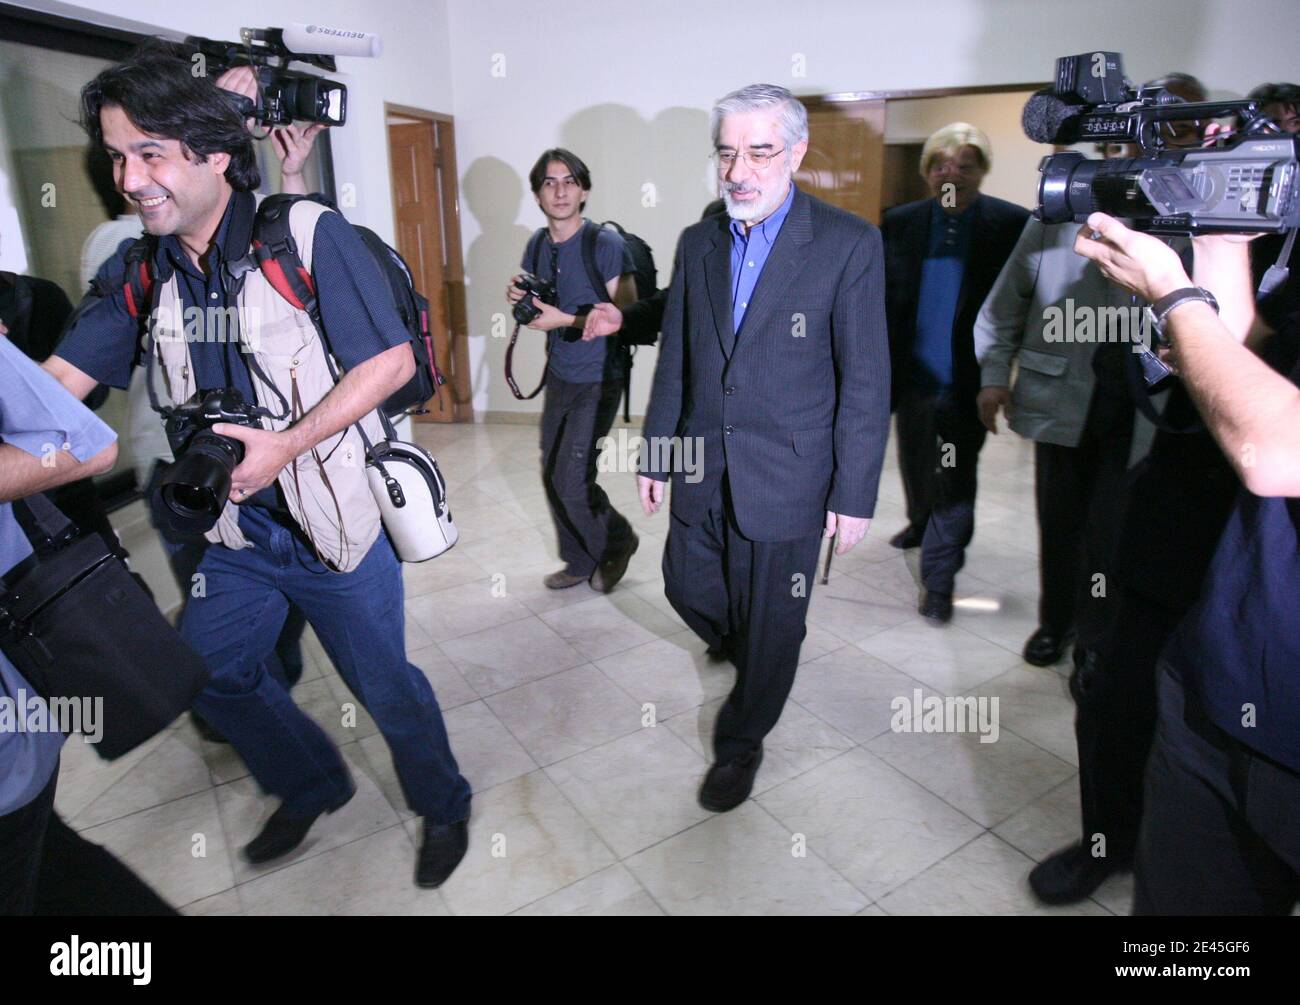 Iranian reformist presidential candidate Mir Hossein Mousavi leaves after a press conference in Tehran, Iran on May 29, 2009. Mousavi, a former premier, said that he is prepared to hold talks with the international P5-plus-1 group over Iran's nuclear drive if elected, but he added that Tehran would continue its nuclear programme. Photo by Farzaneh Khademian/ABACAPRESS.COM Stock Photo